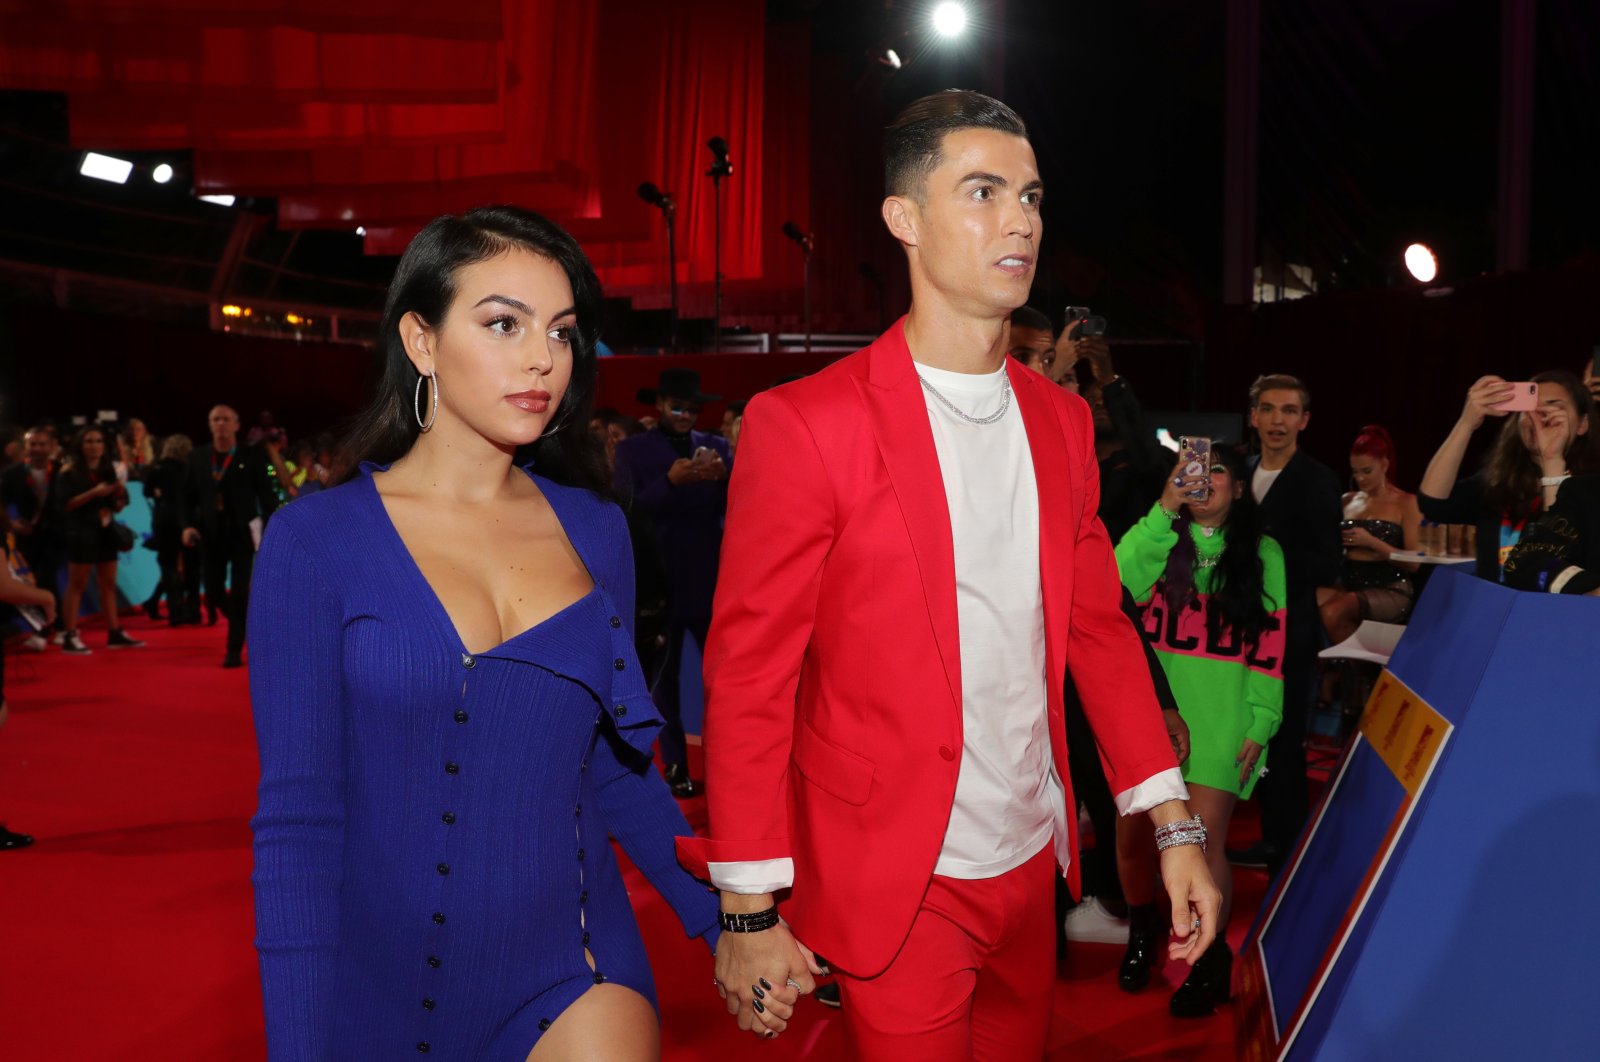 Georgina Rodriguez (L) and Cristiano Ronaldo attend the MTV EMAs 2019 at FIBES Conference and Exhibition Center, Seville, Spain, Nov. 03, 2019. (Getty Images Photo)